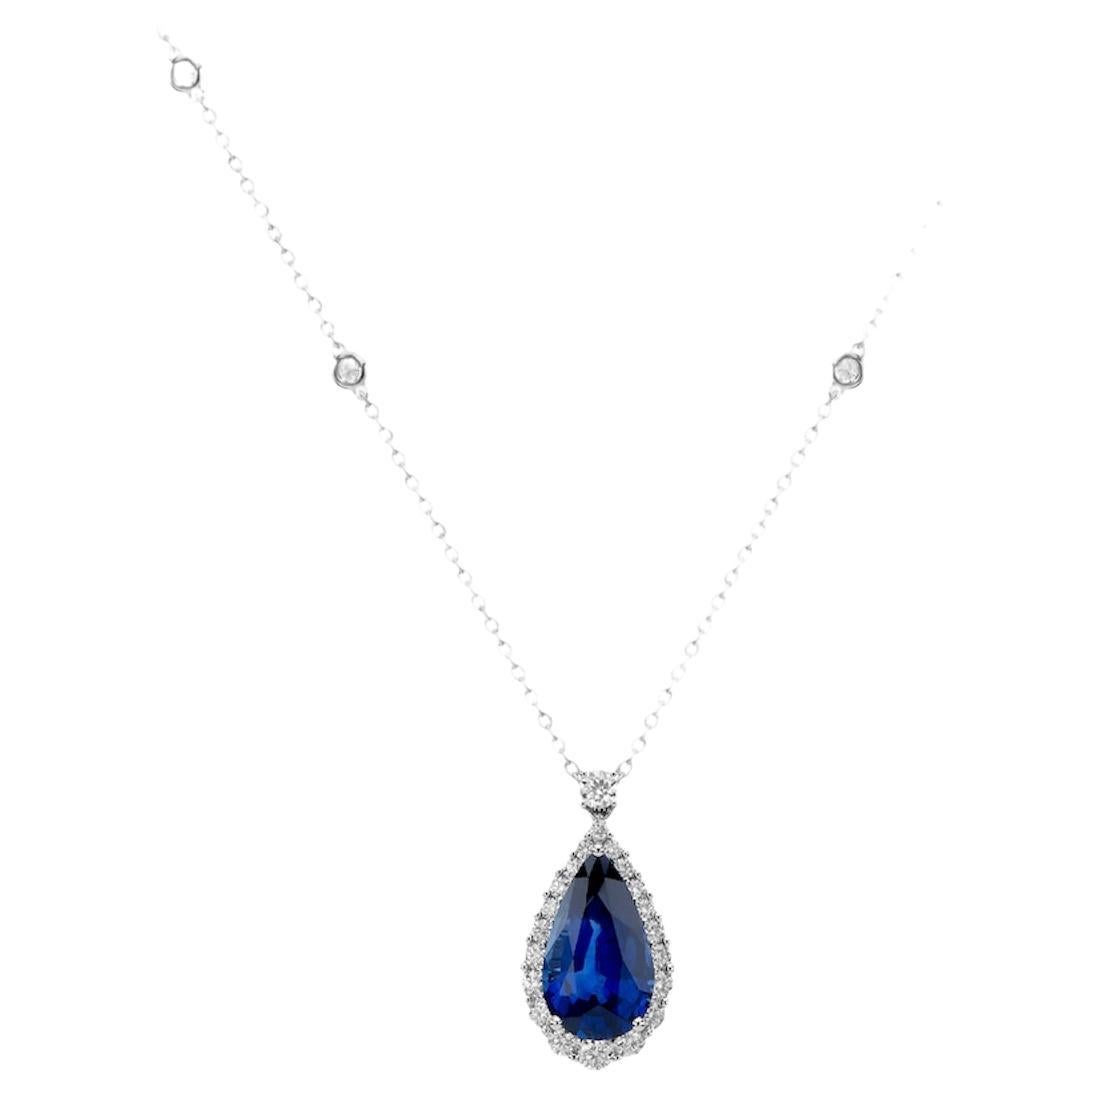 GIA certified 11.75 Carat Pear shape Sapphire and Diamond pendant For Sale